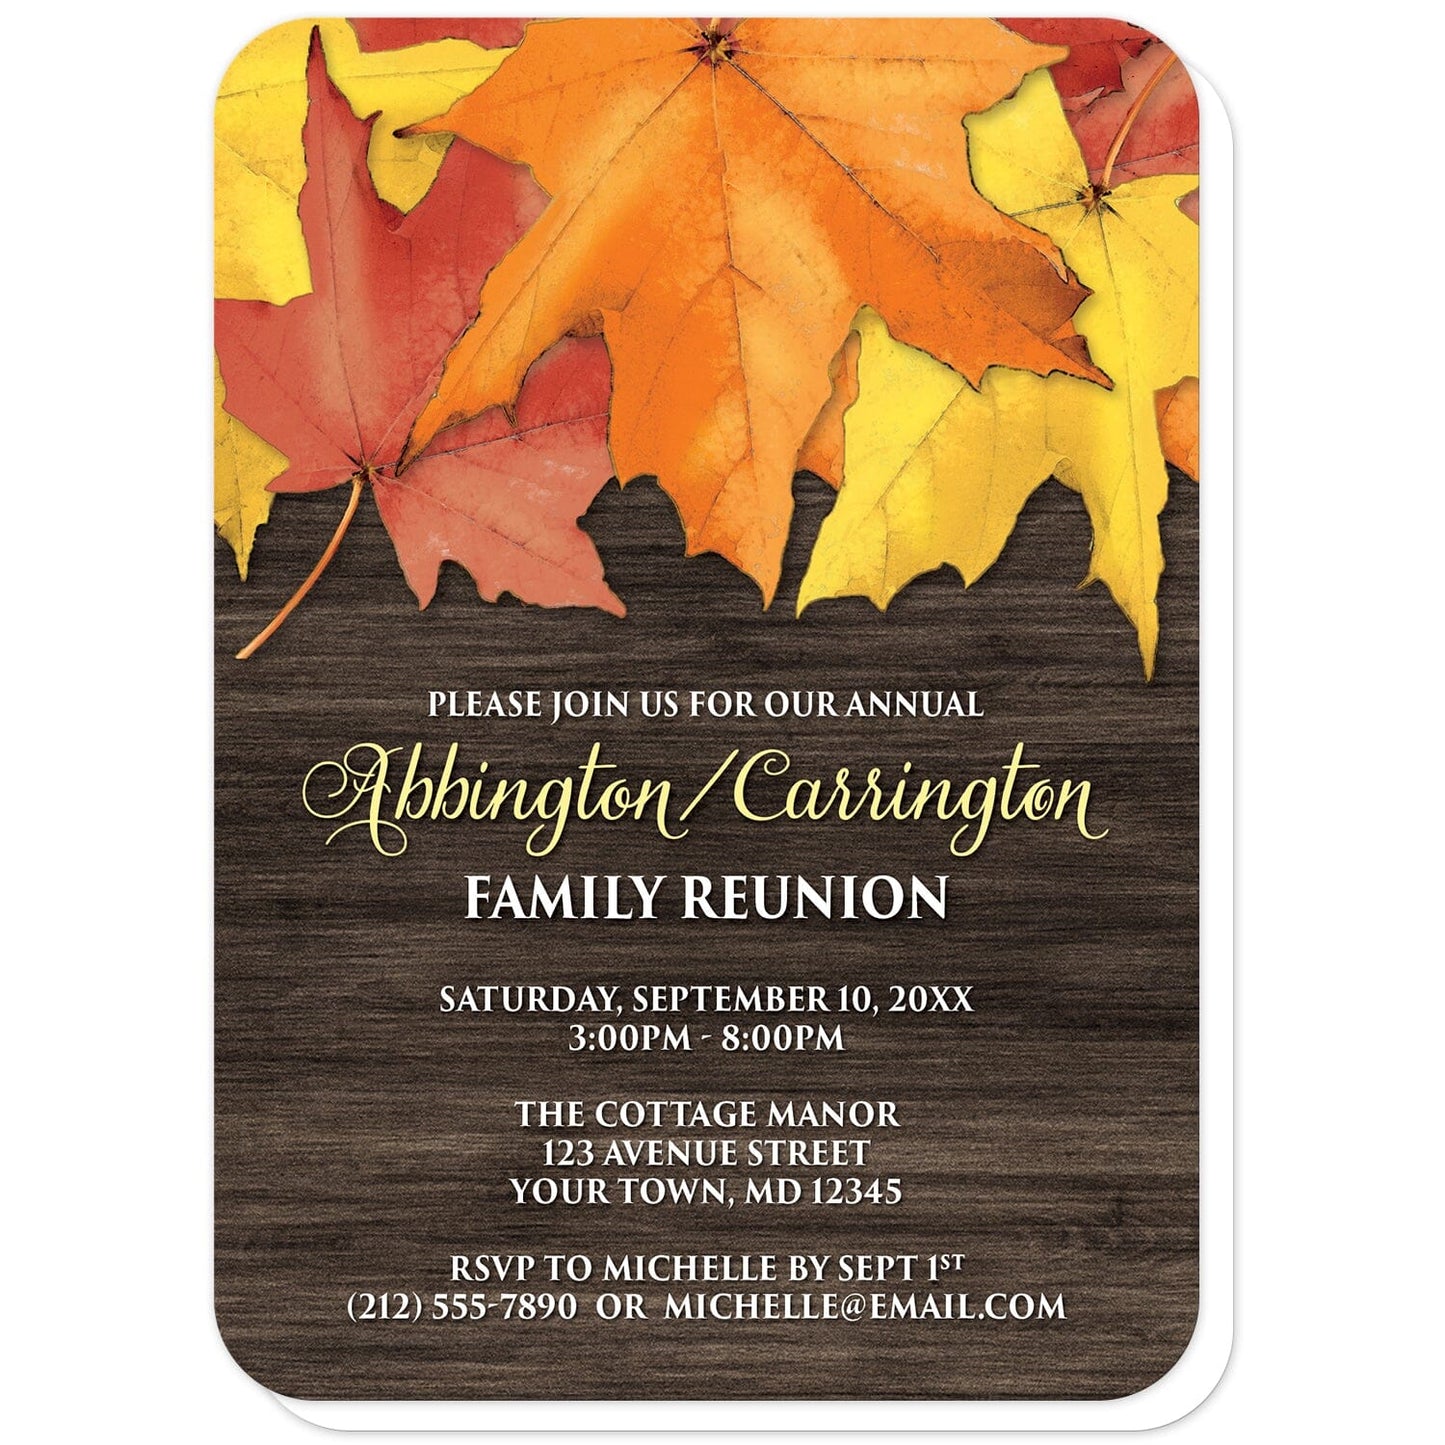 Rustic Autumn Leaves Wood Family Reunion Invitations (with rounded corners) at Artistically Invited. Southern-inspired rustic autumn leaves wood family reunion invitations with an arrangement of rustic yellow, orange, and red fall leaves along the top over a dark brown wood pattern. Your personalized reunion celebration details are custom printed in yellow and white over the rustic wood background. 